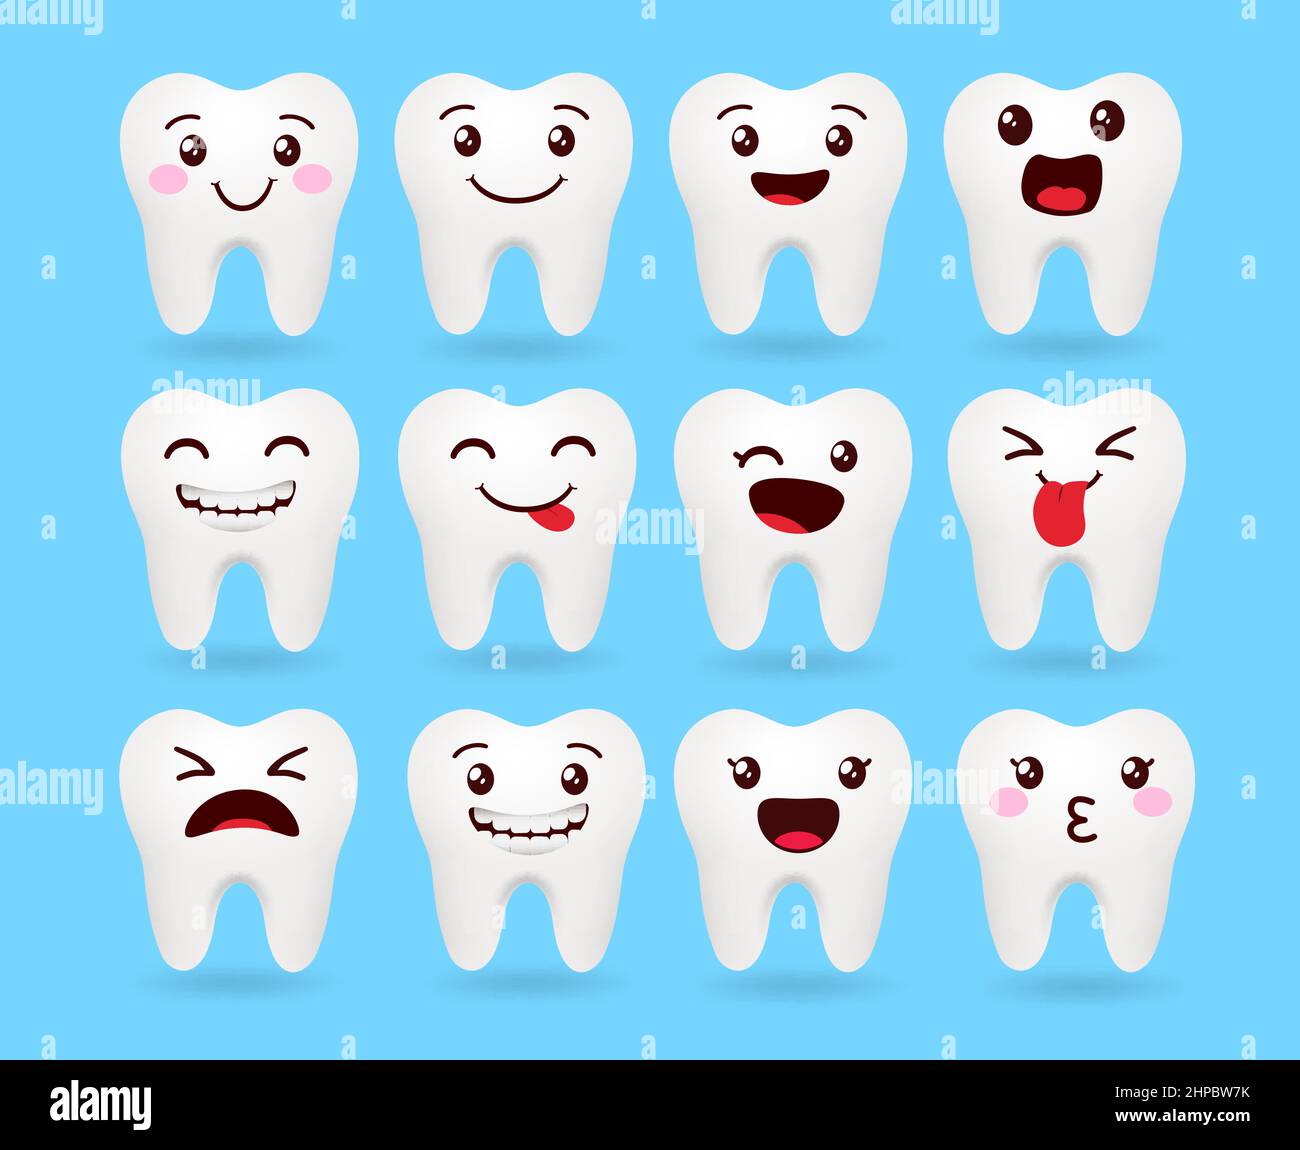 Emoji tooth vector set design. Emojis teeth emoticon with cute kawaii and funny facial expression for dental emoticons character face expressions. Stock Vector